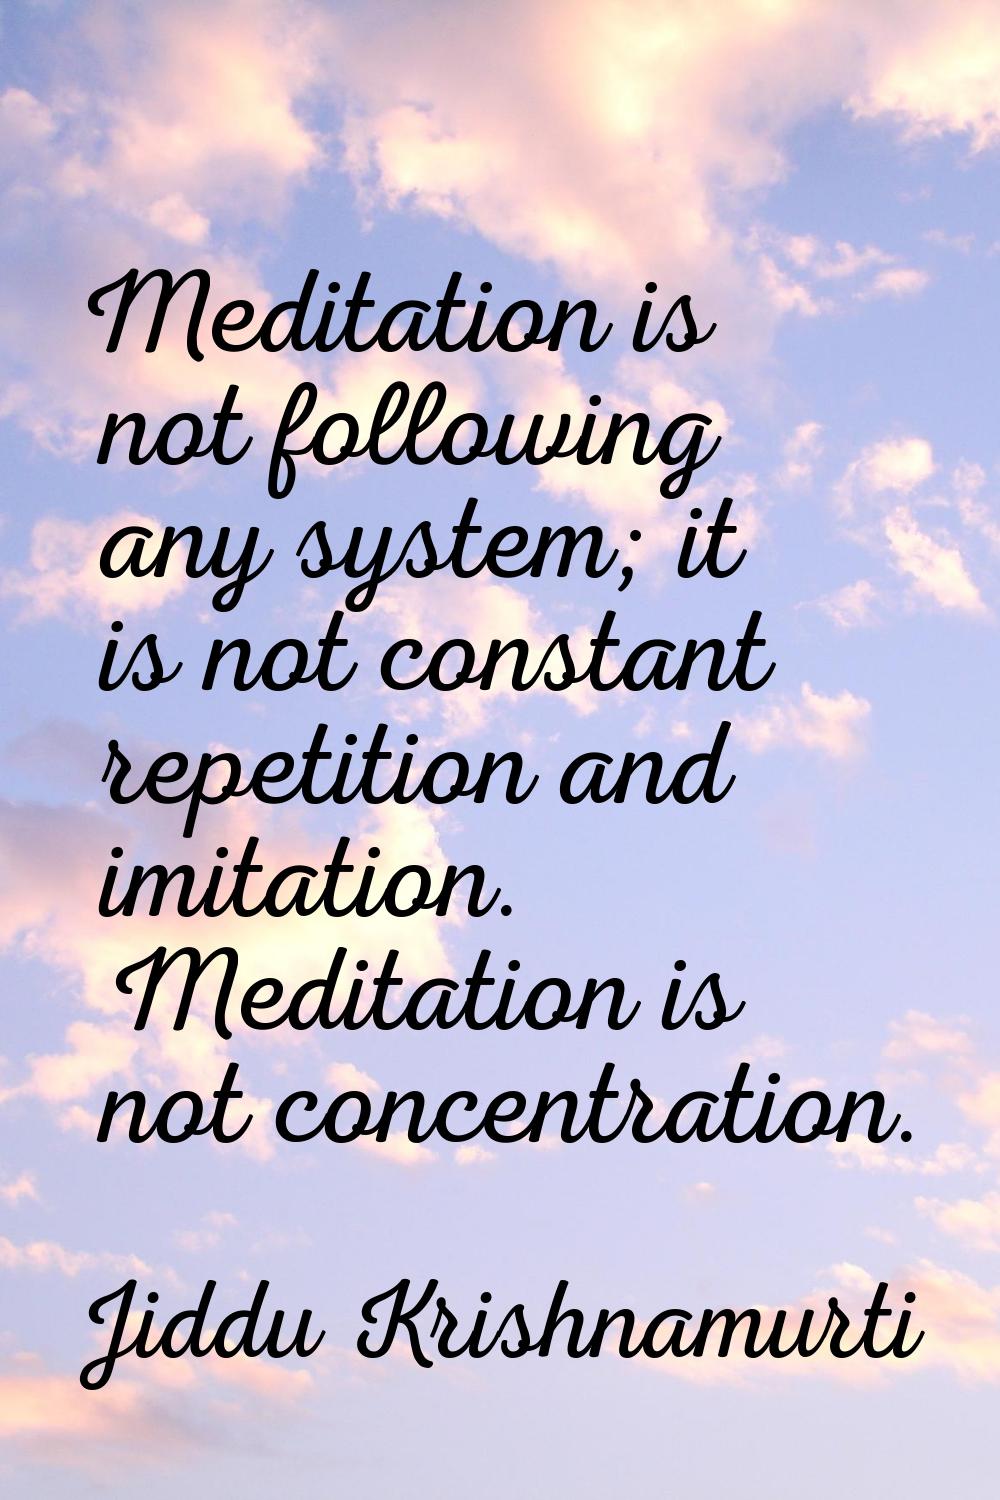 Meditation is not following any system; it is not constant repetition and imitation. Meditation is 